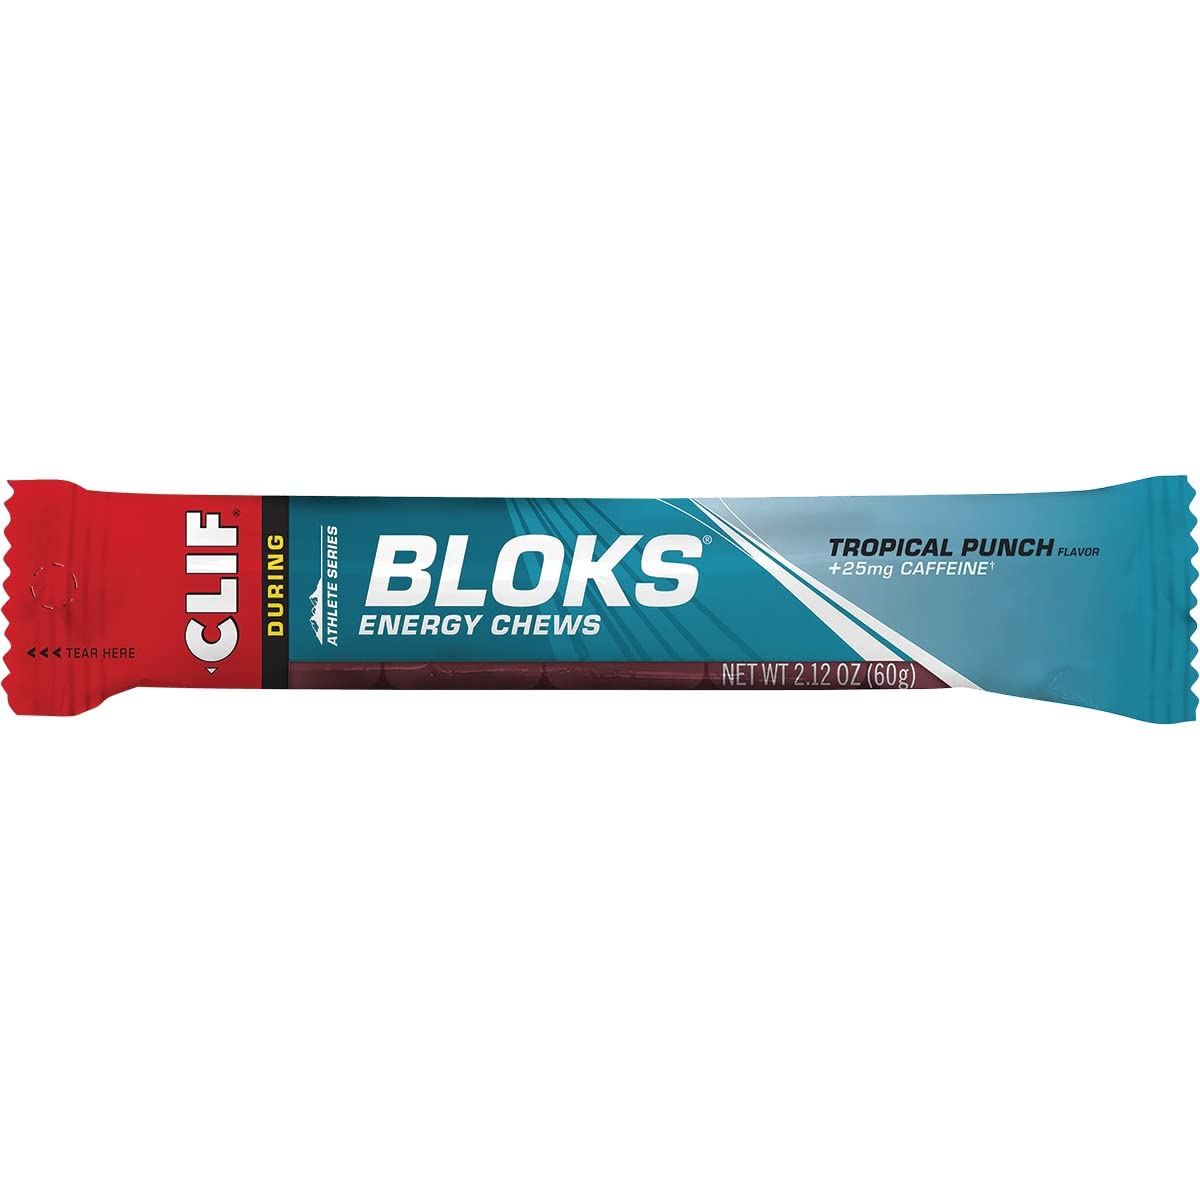 CLIF BLOKS Energy Chews Tropical Punch Other - Nutrition - Gummies